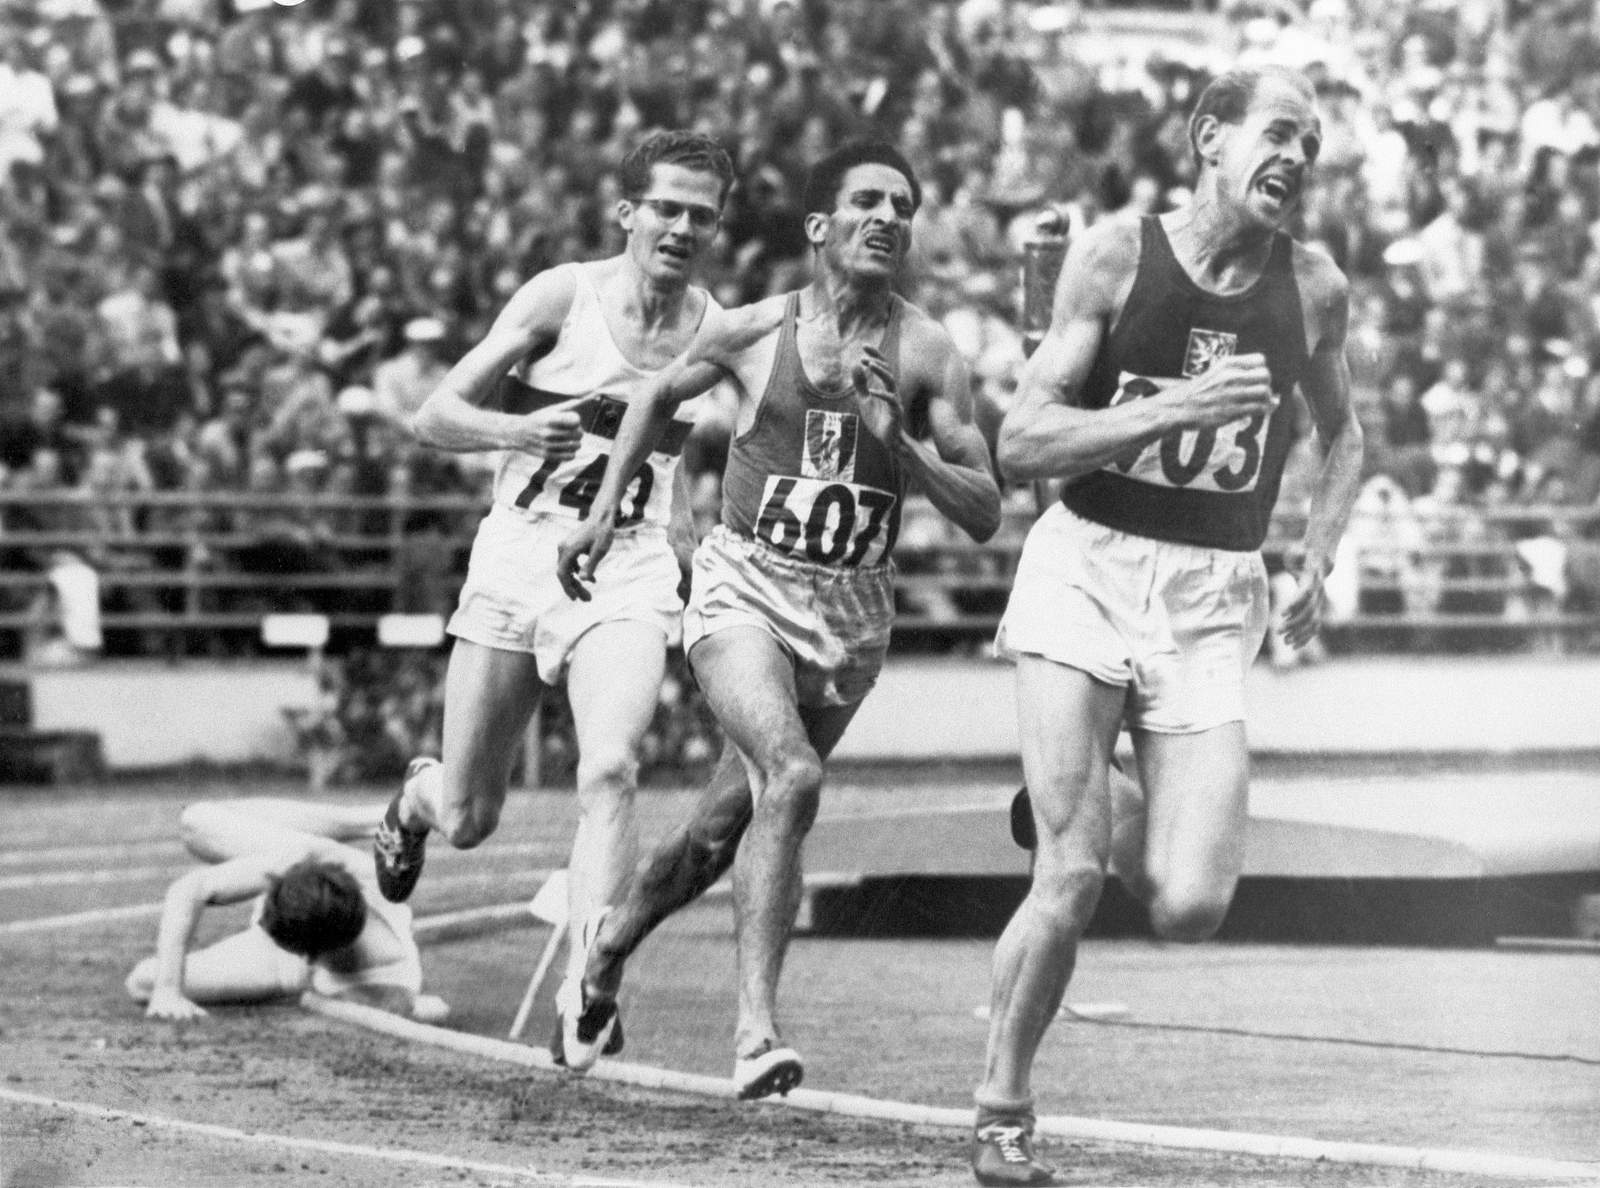 AP WAS THERE: 1952 Helsinki Games